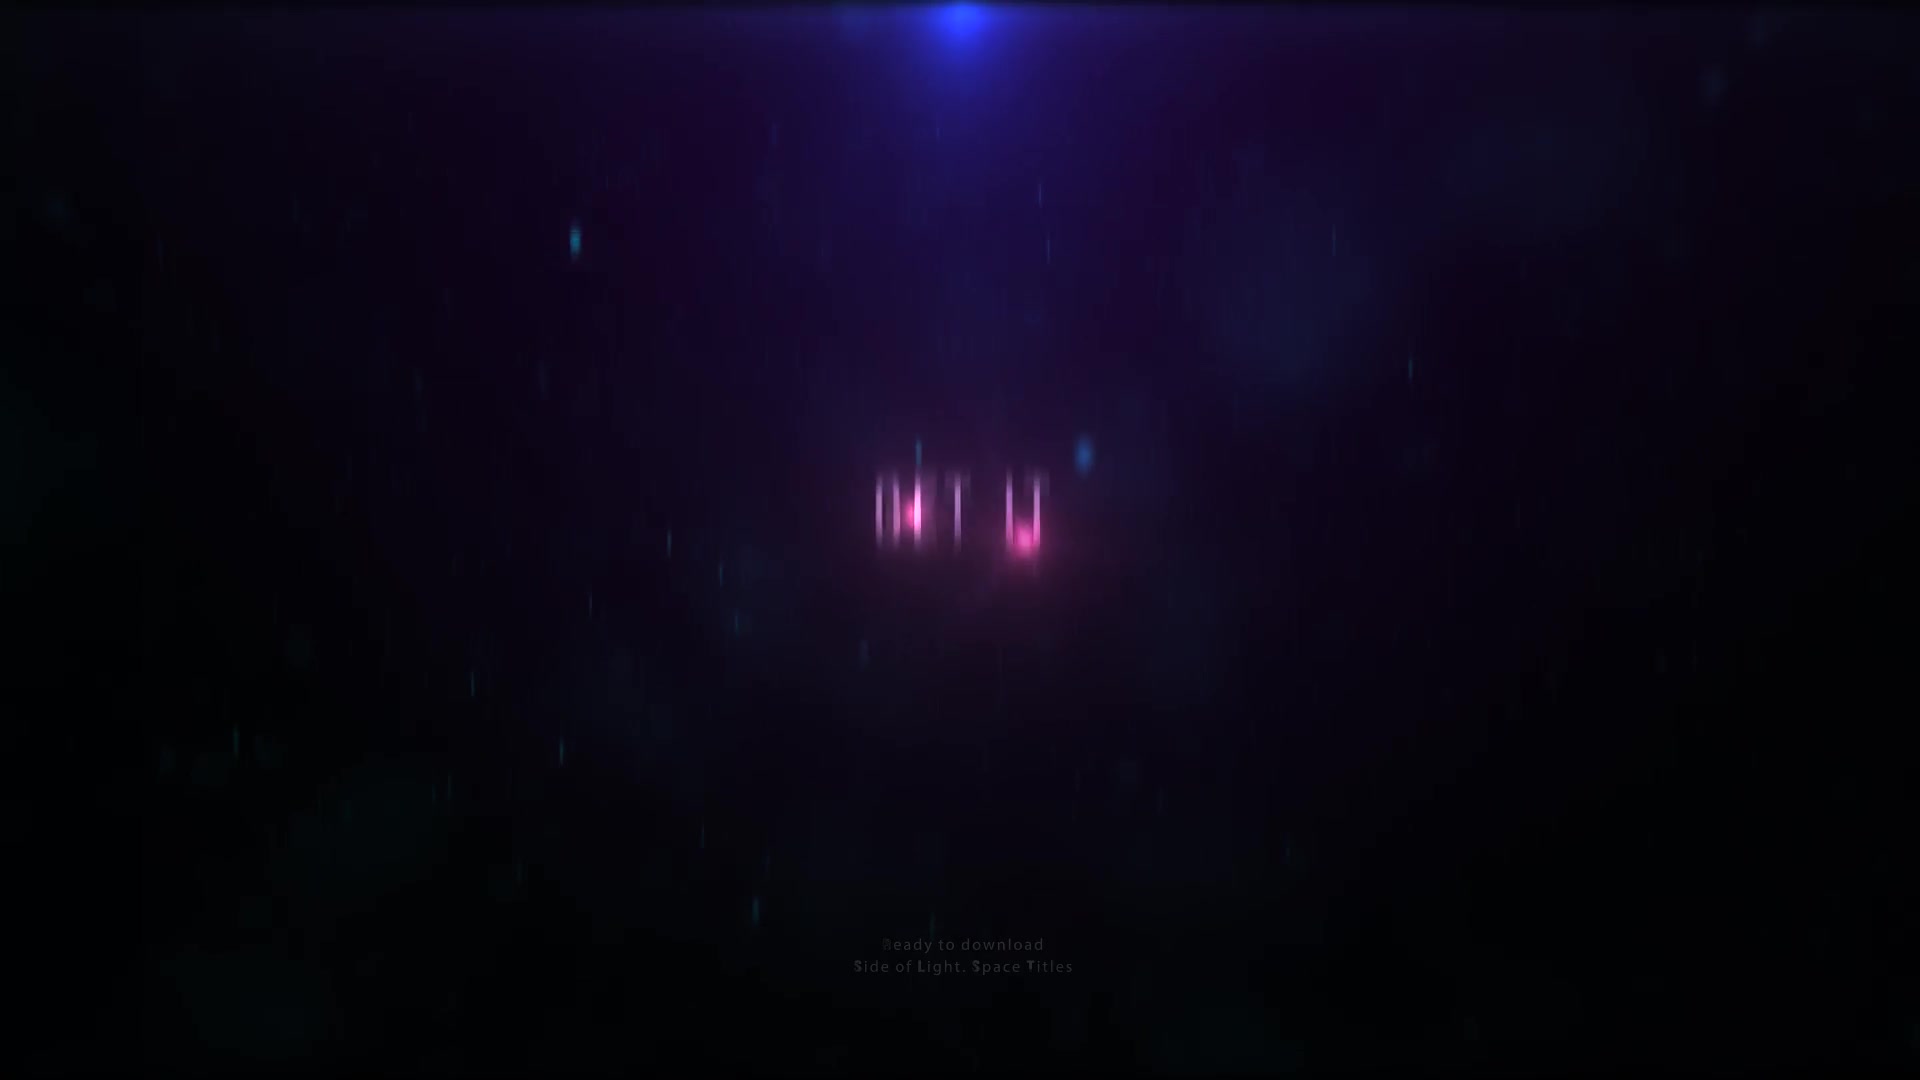 Side of Light Space Titles Videohive 23733064 Premiere Pro Image 11